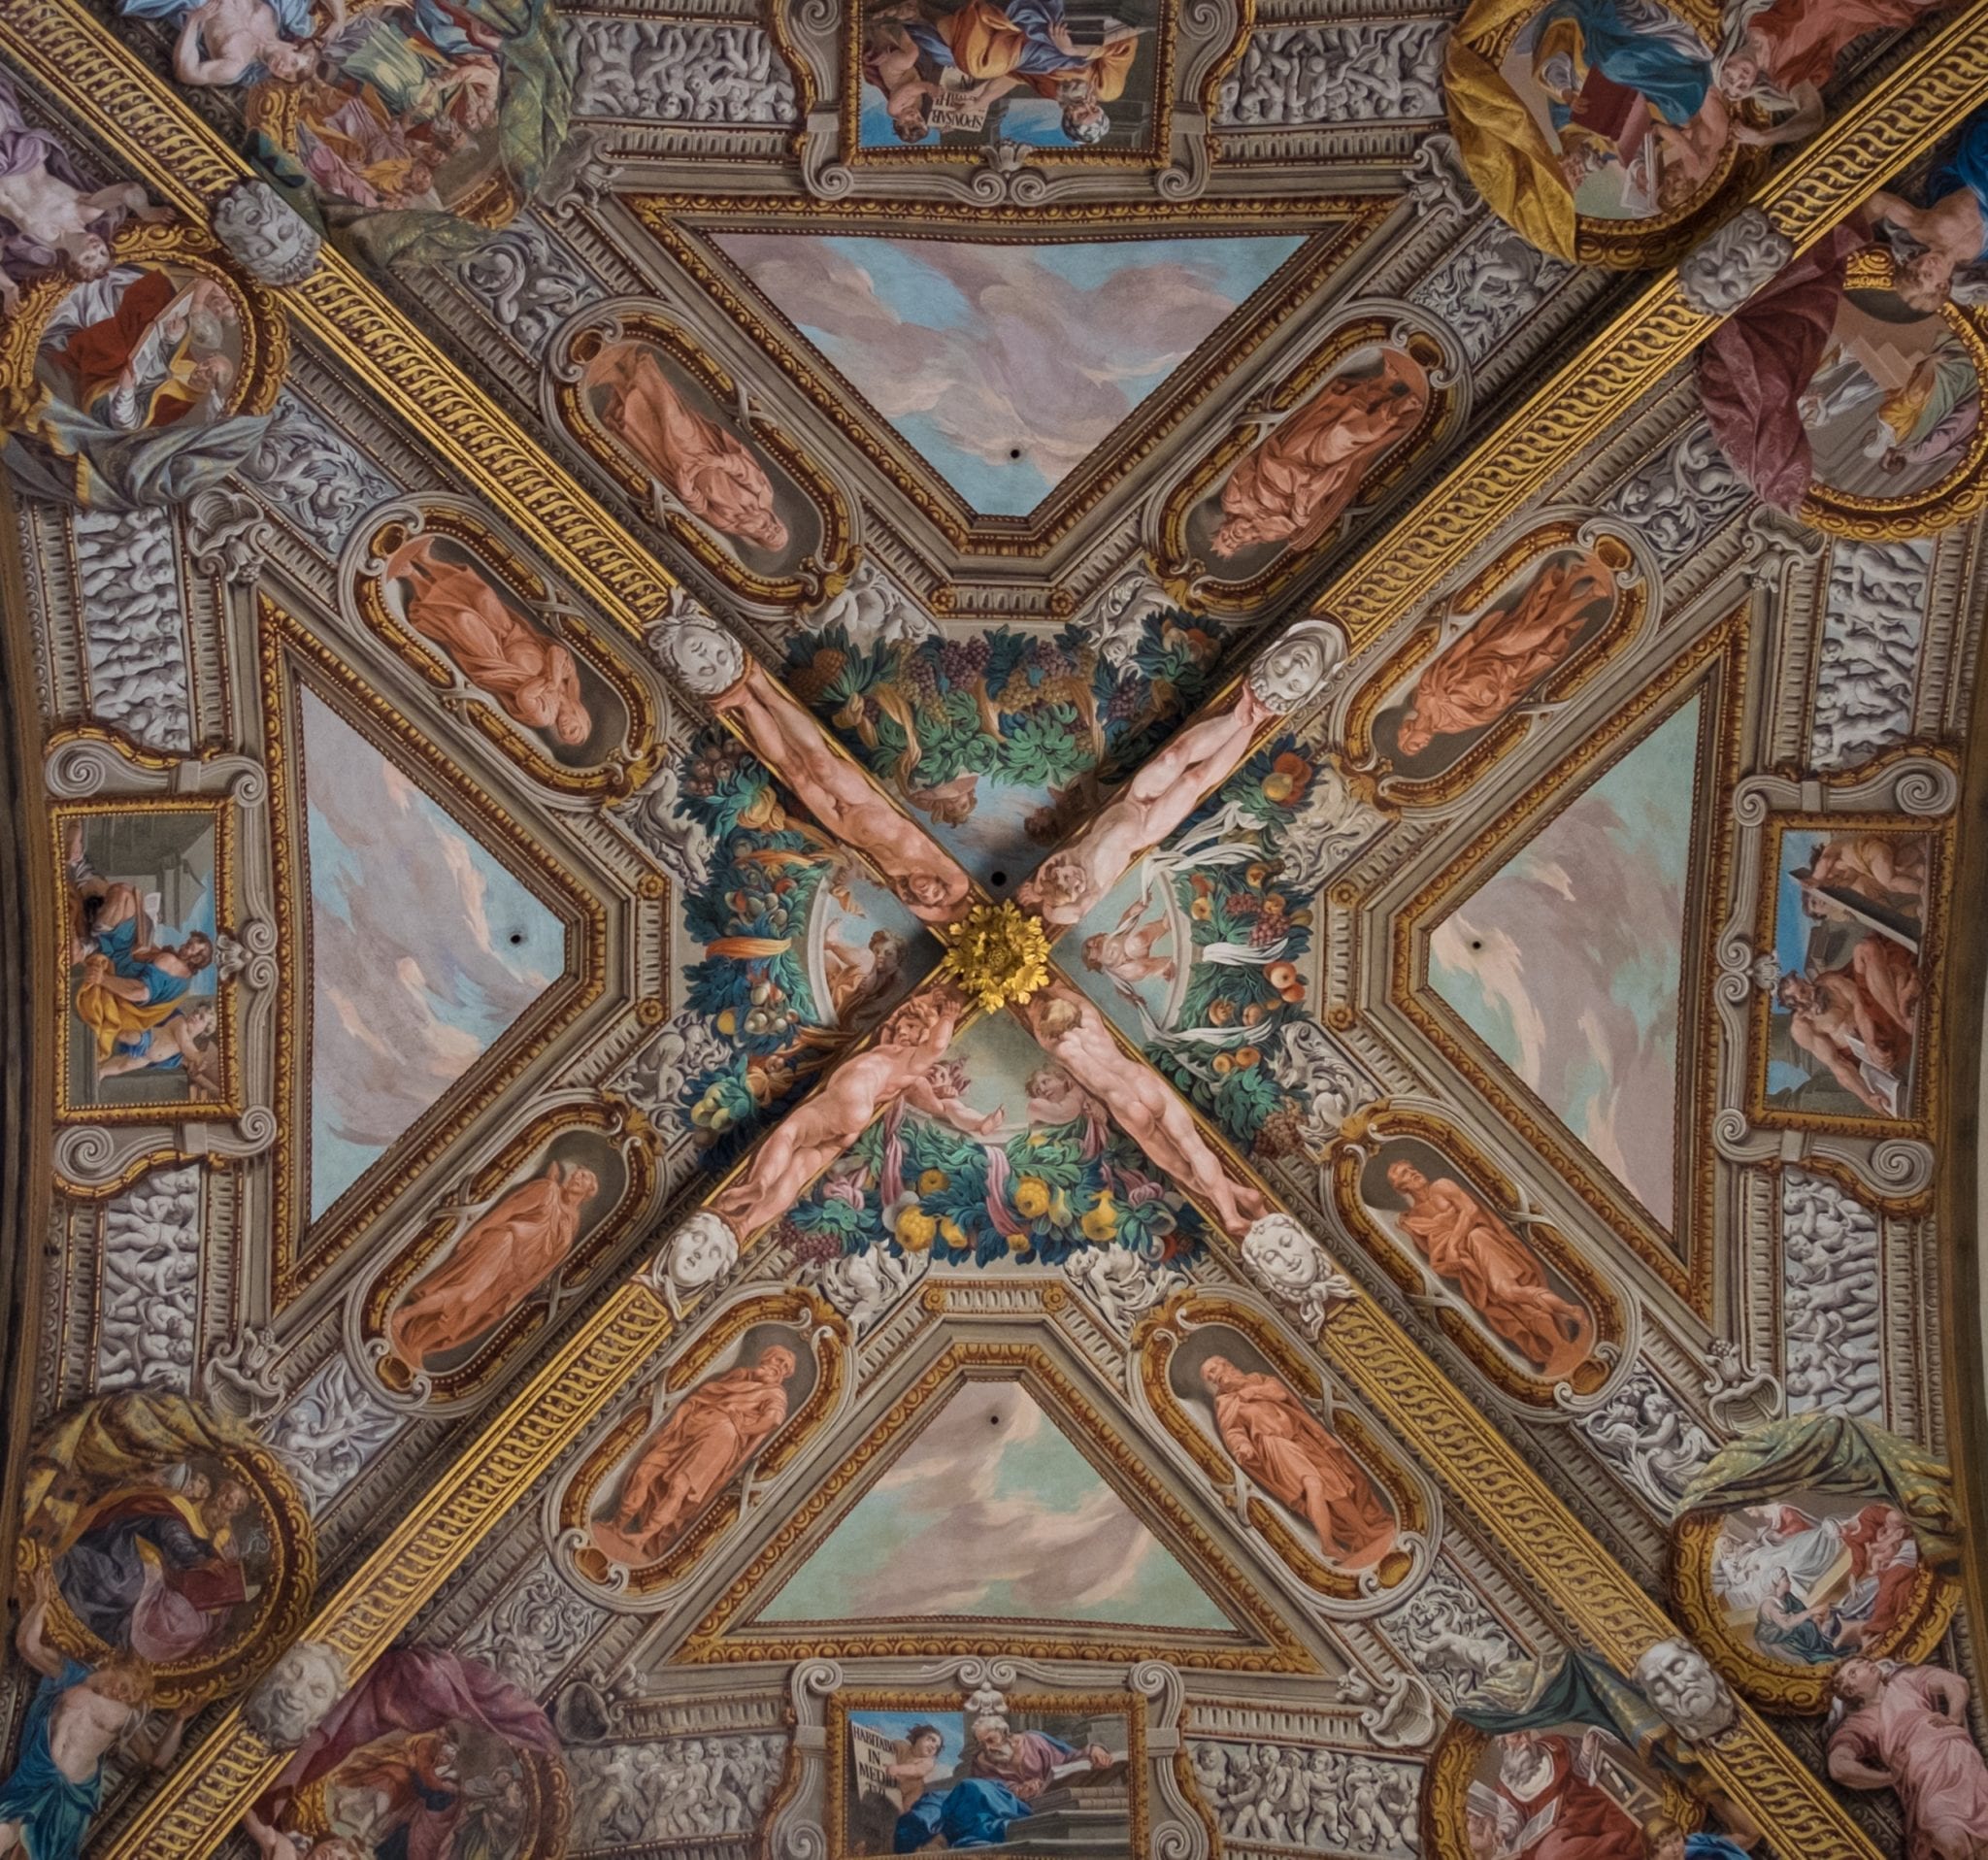 A square image of Parma's cathedral ceiling divided into sections shaped like an X, paintings on the ceiling.